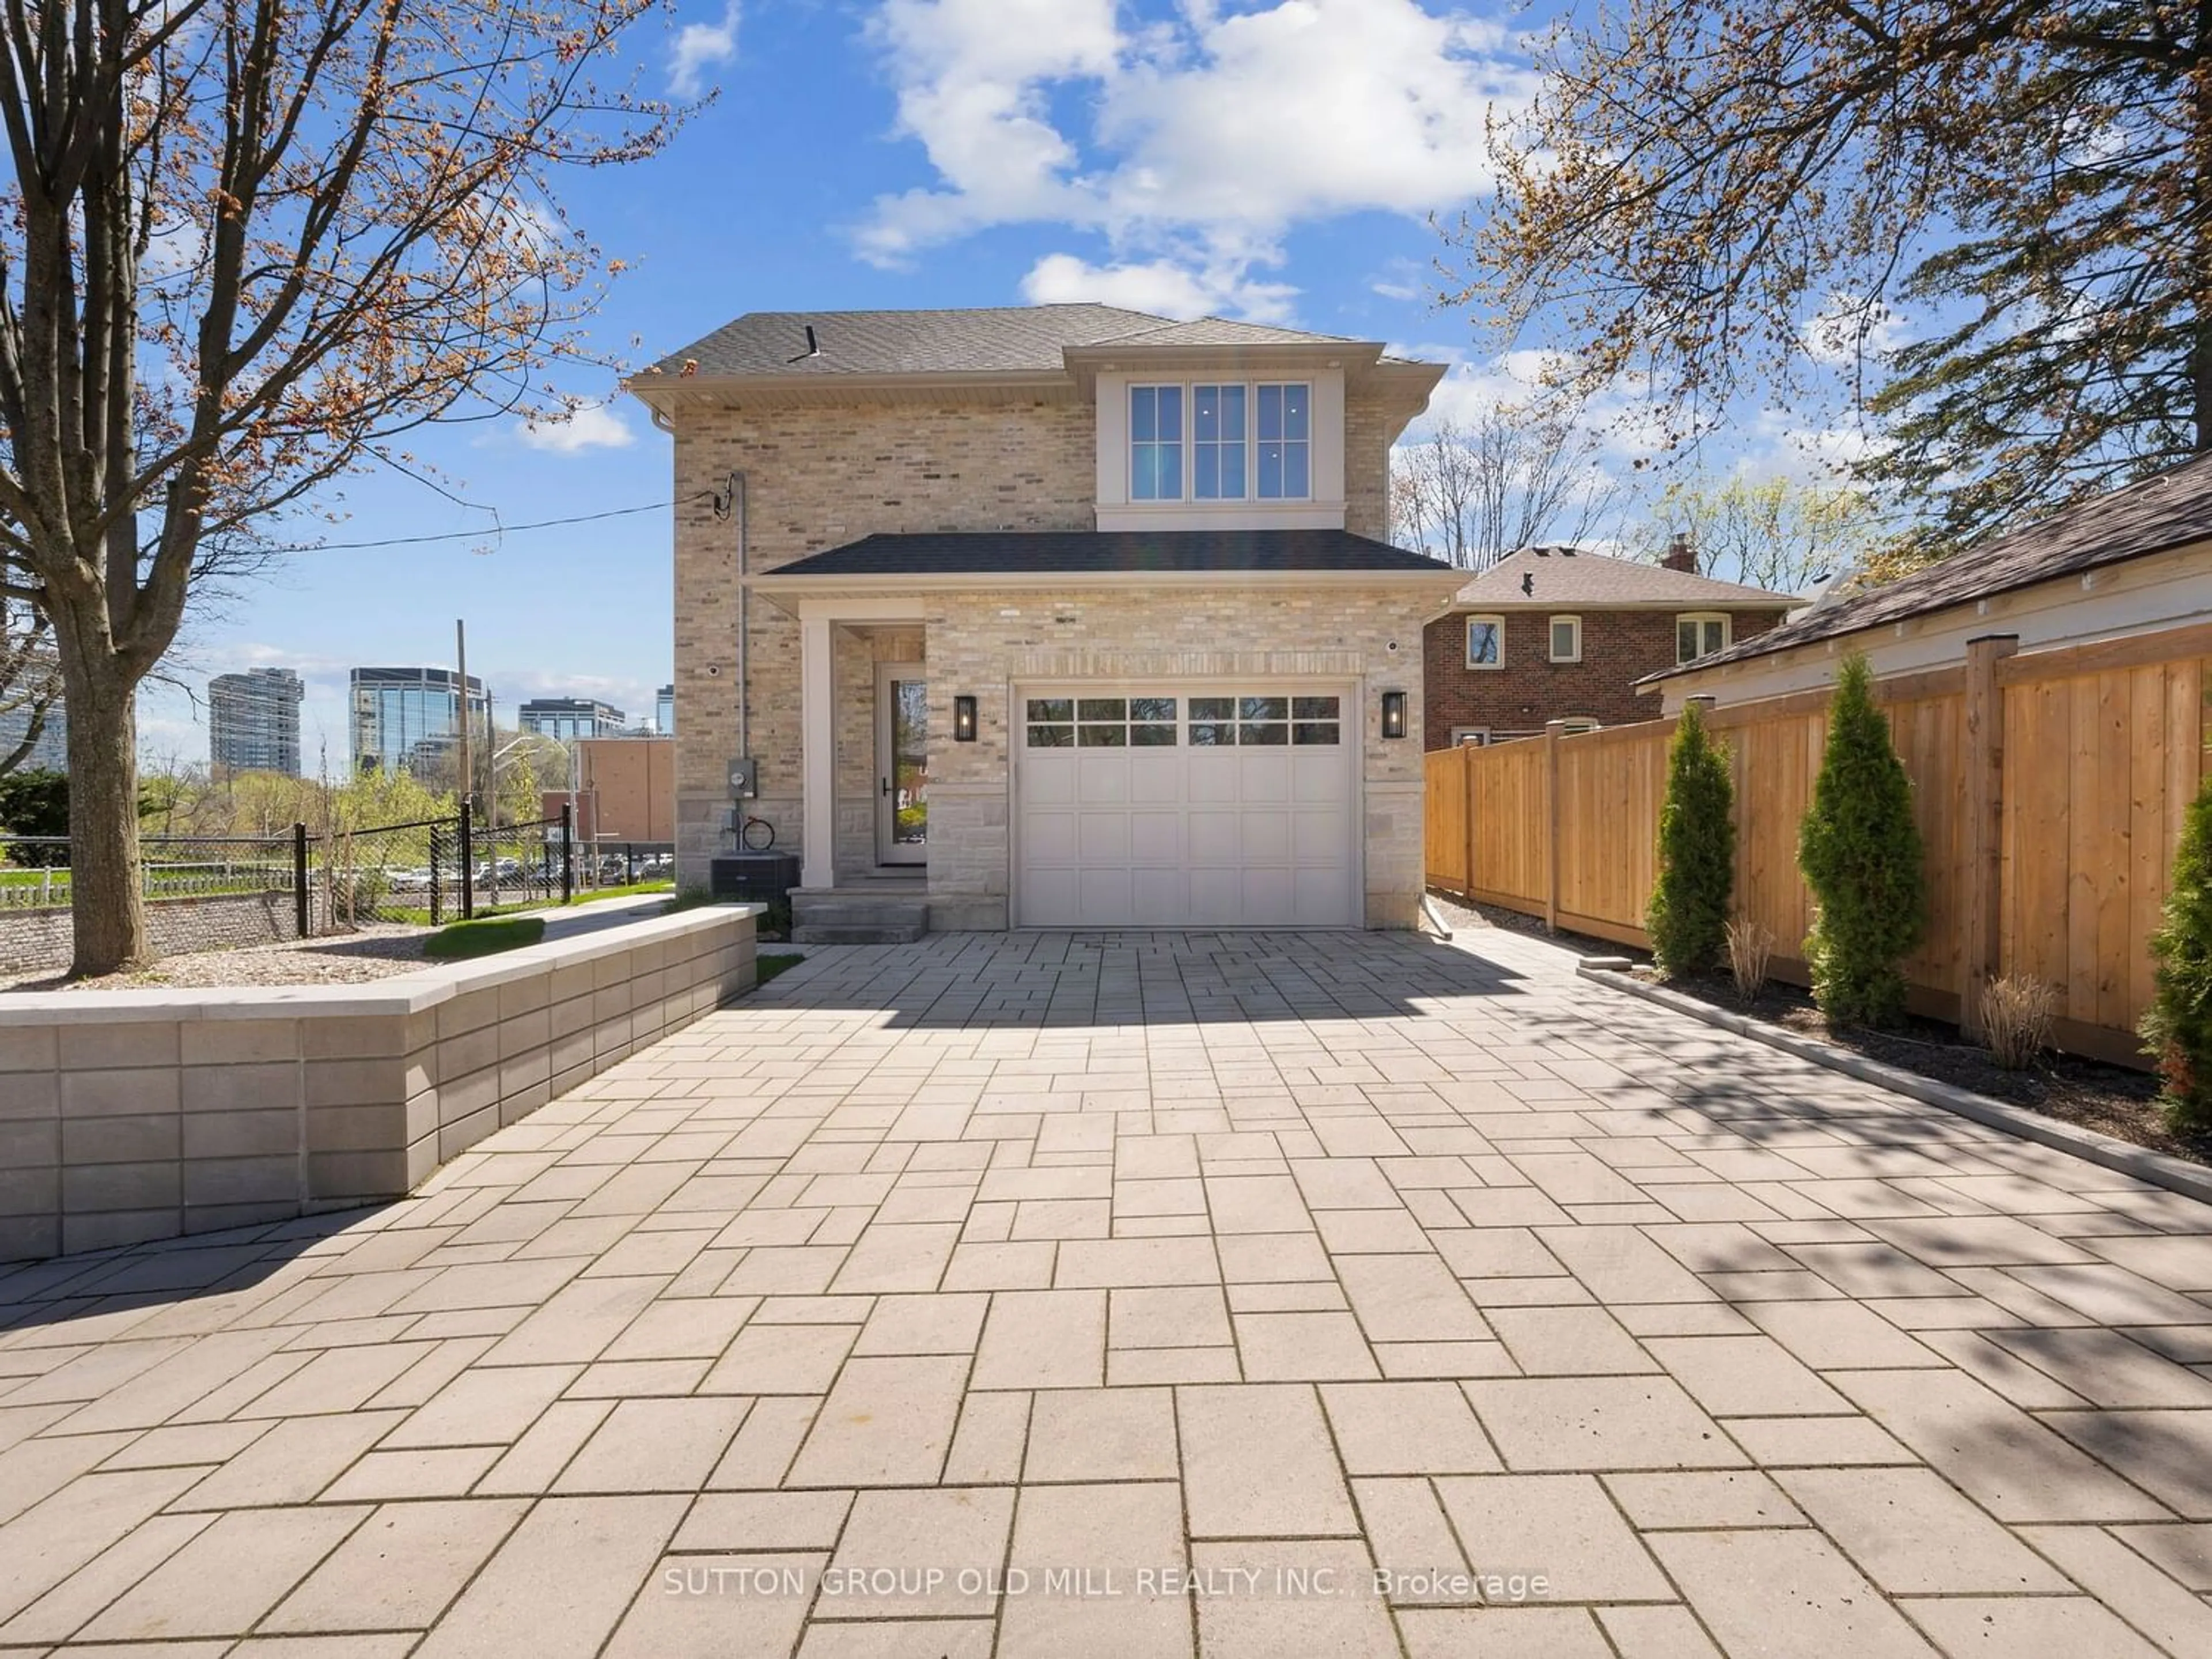 Home with brick exterior material for 2 Allanbrooke Dr, Toronto Ontario M9A 3N8